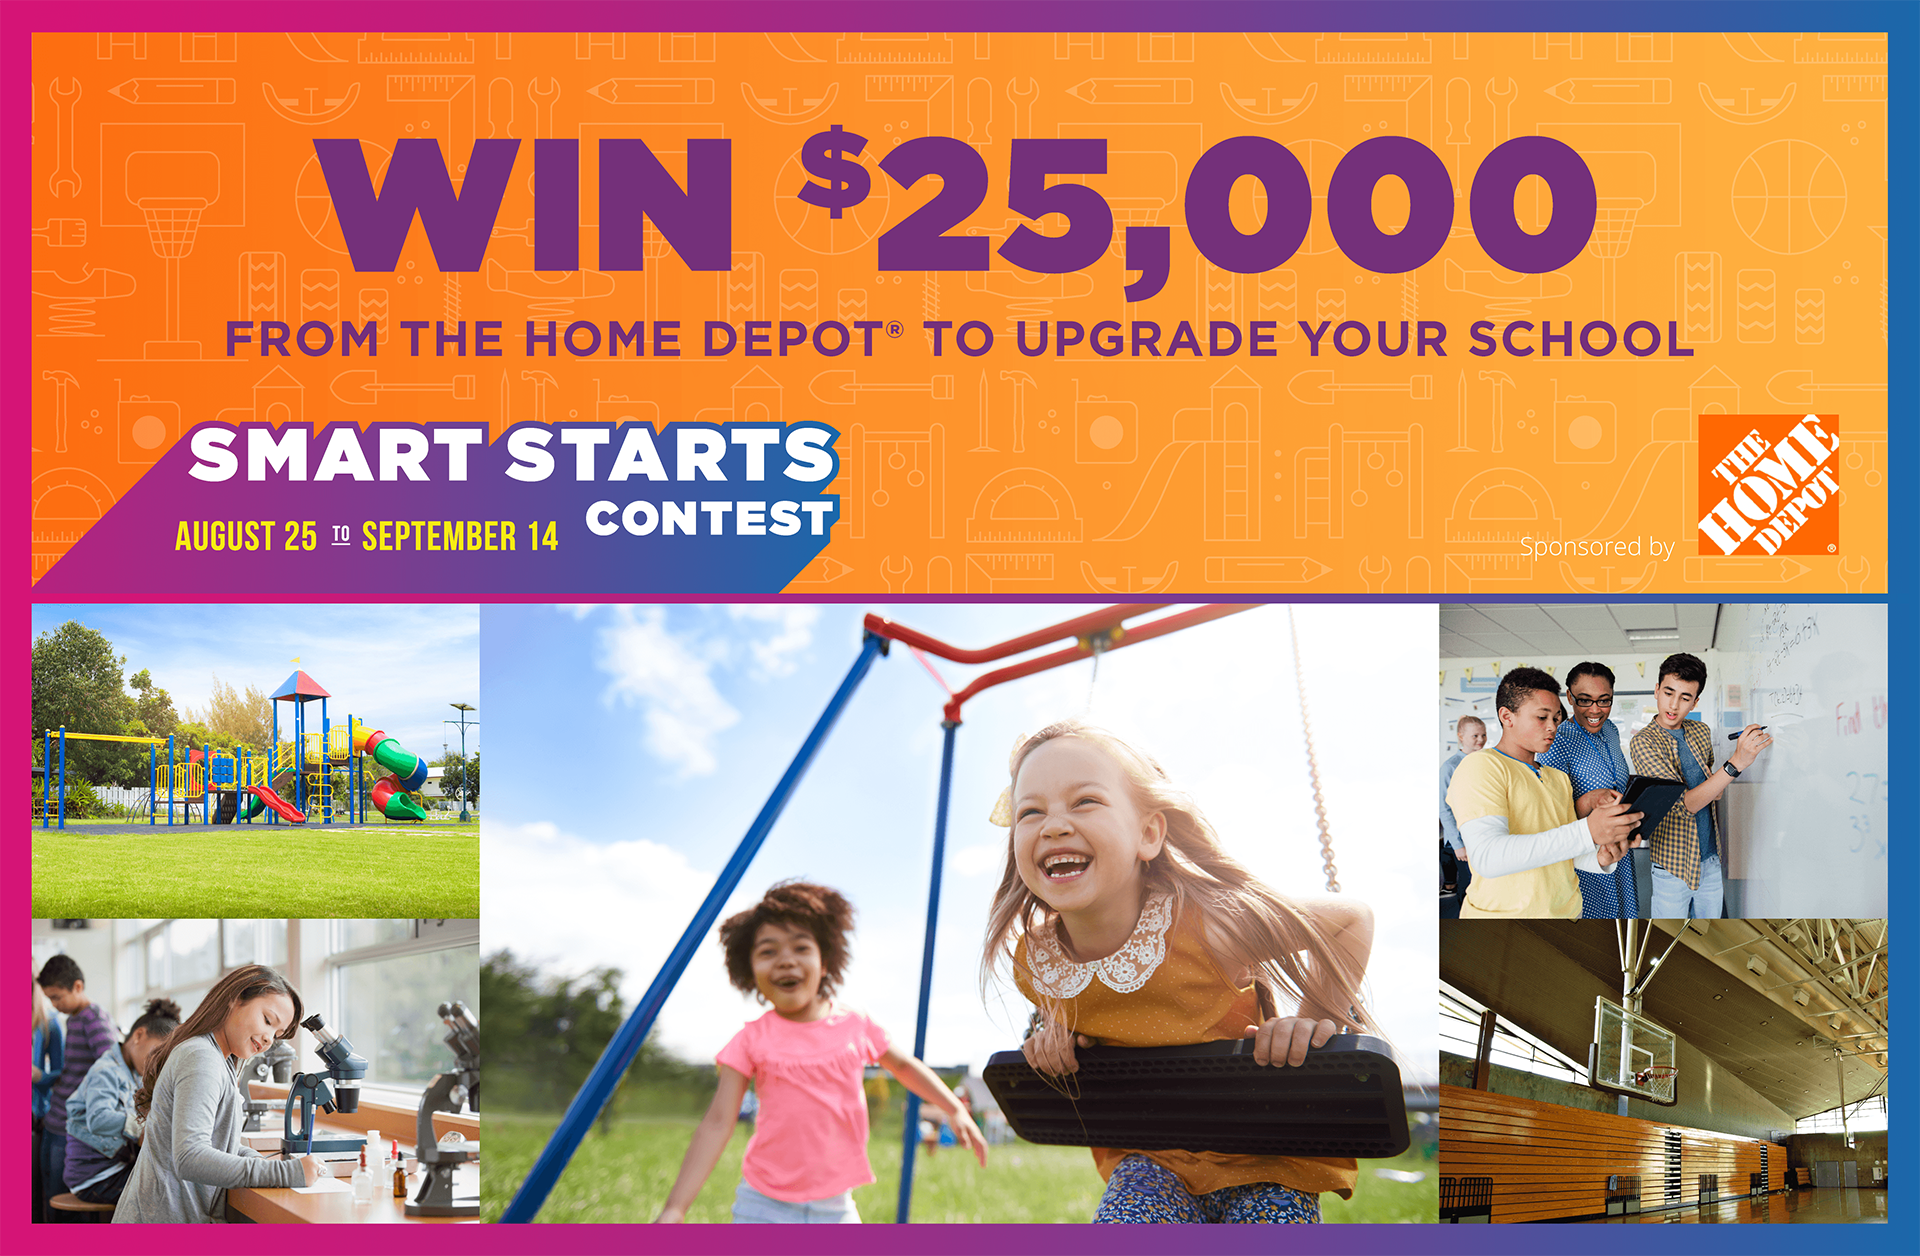 Win $25,000 from The Home Depot to Upgrade Your School